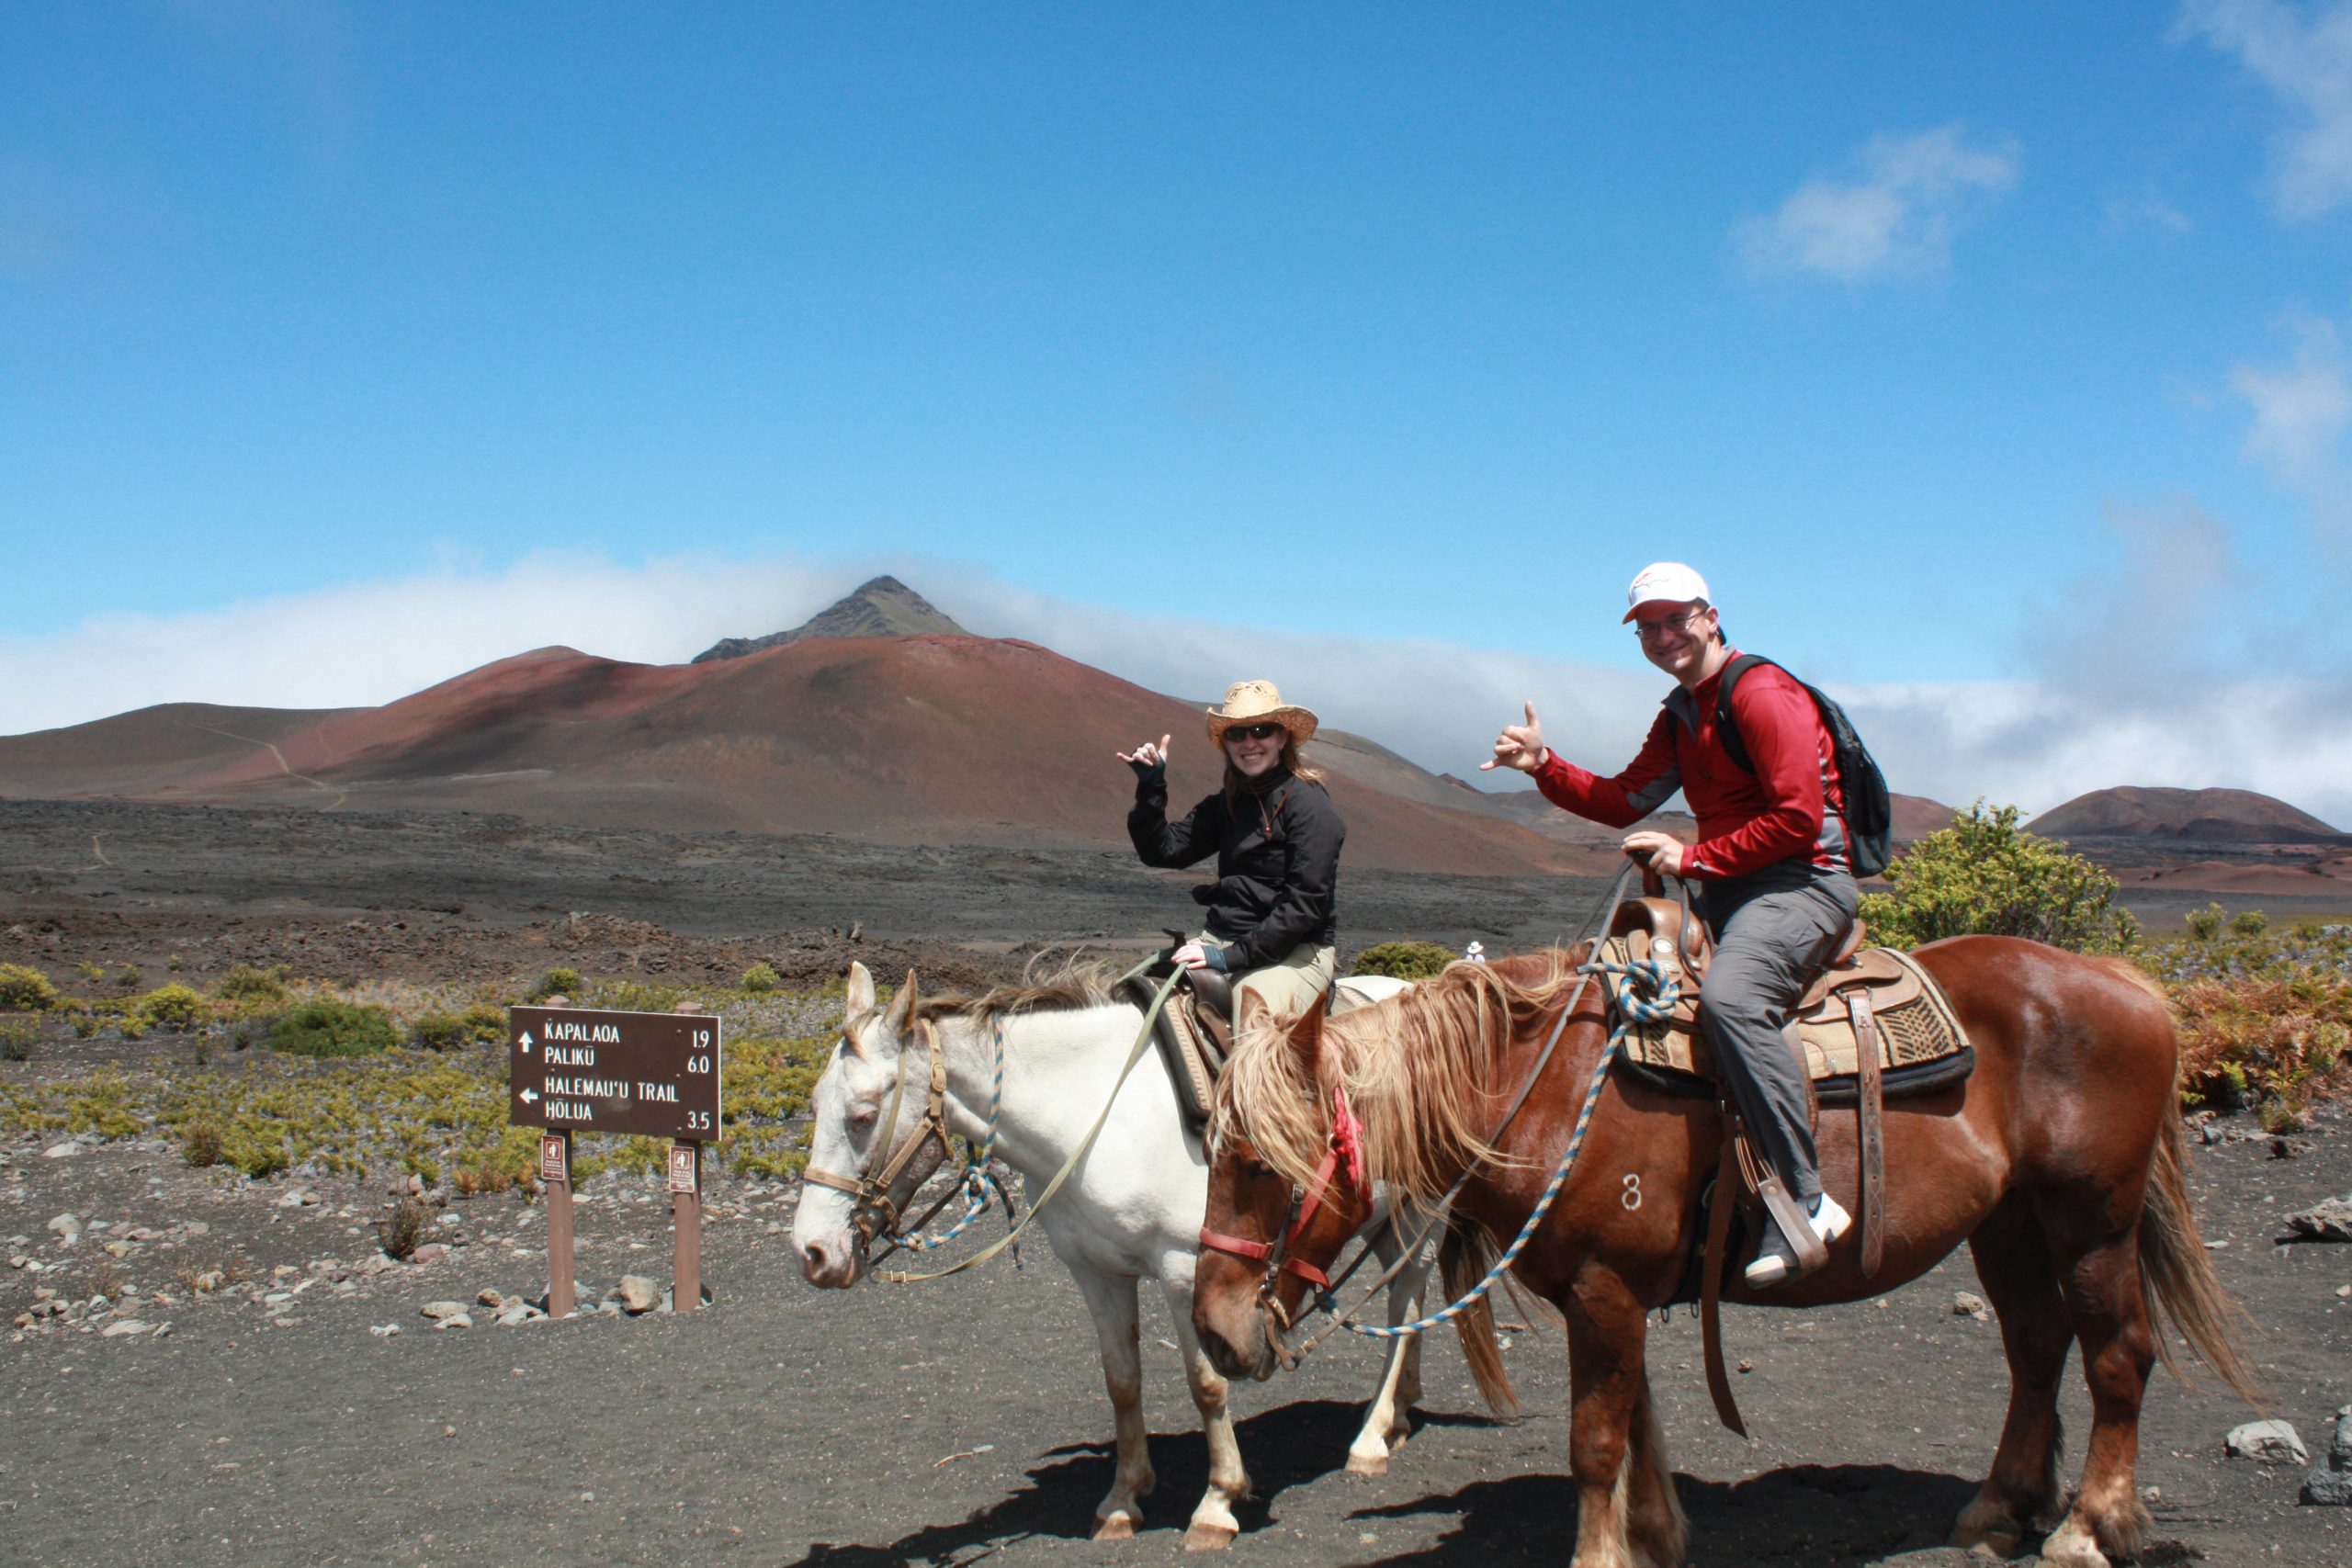 On horses at the bottom of Haleakala's crater.